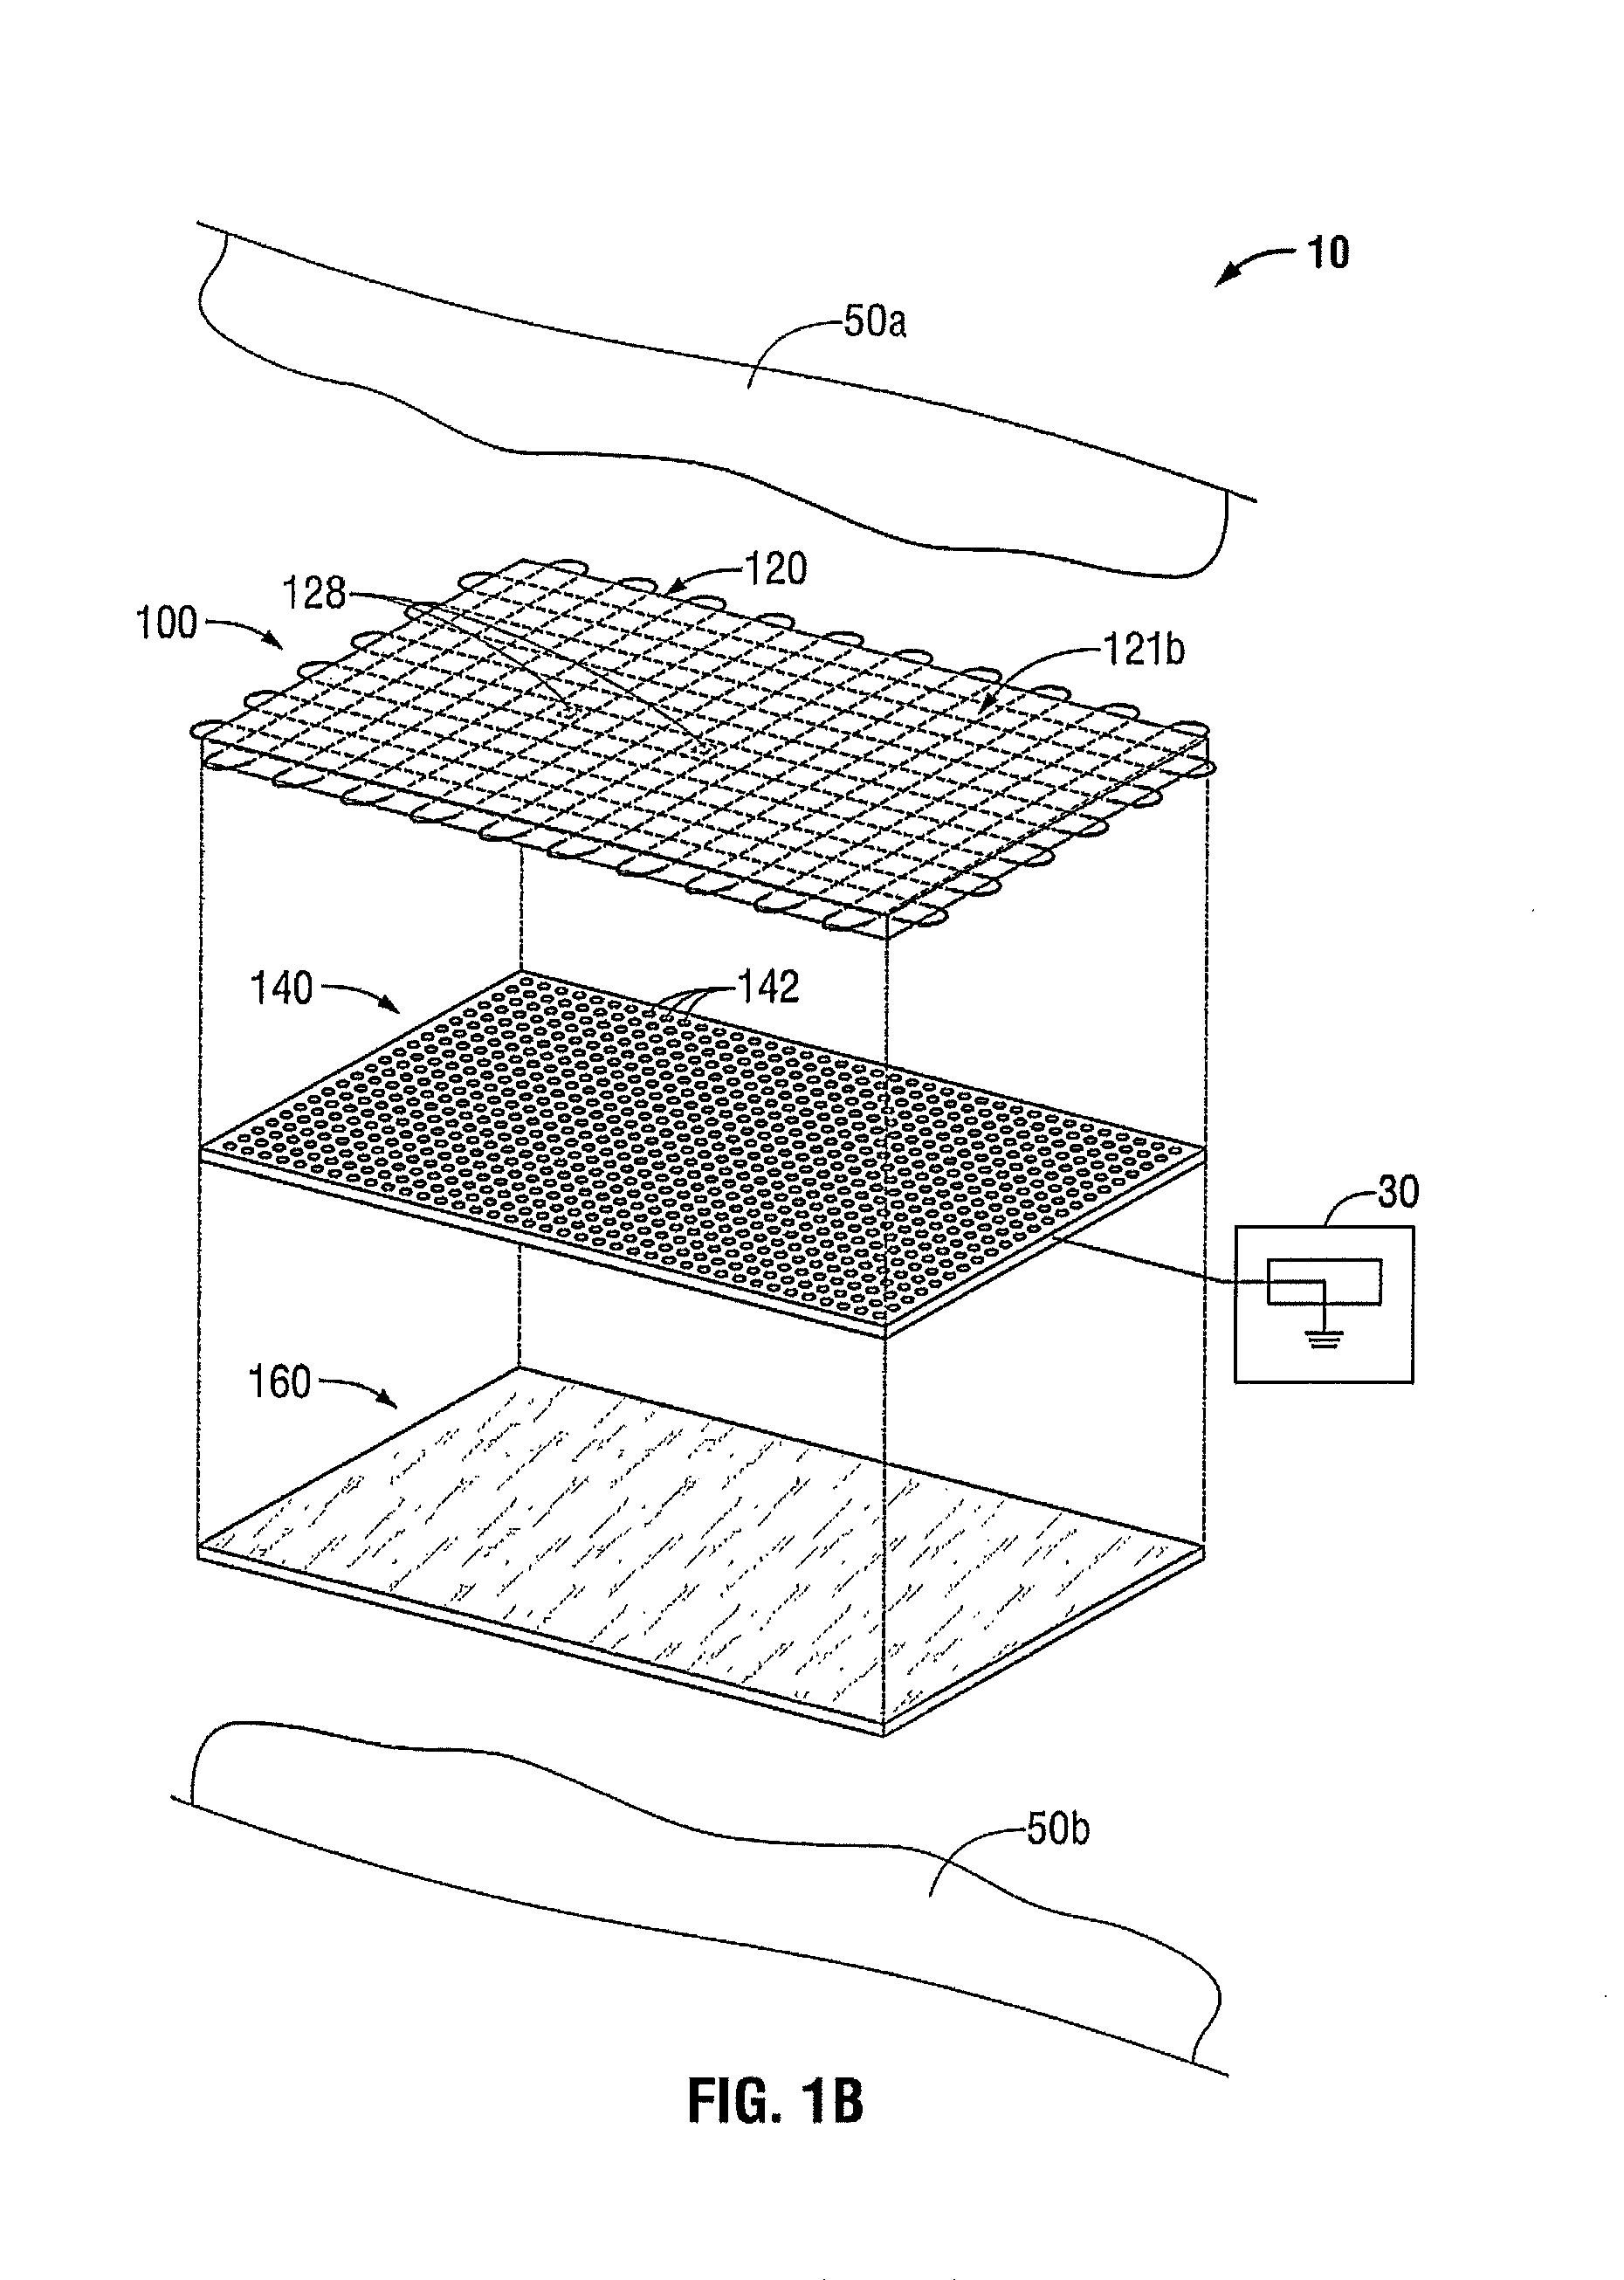 Microwave ablation safety pad, microwave safety pad system and method of use